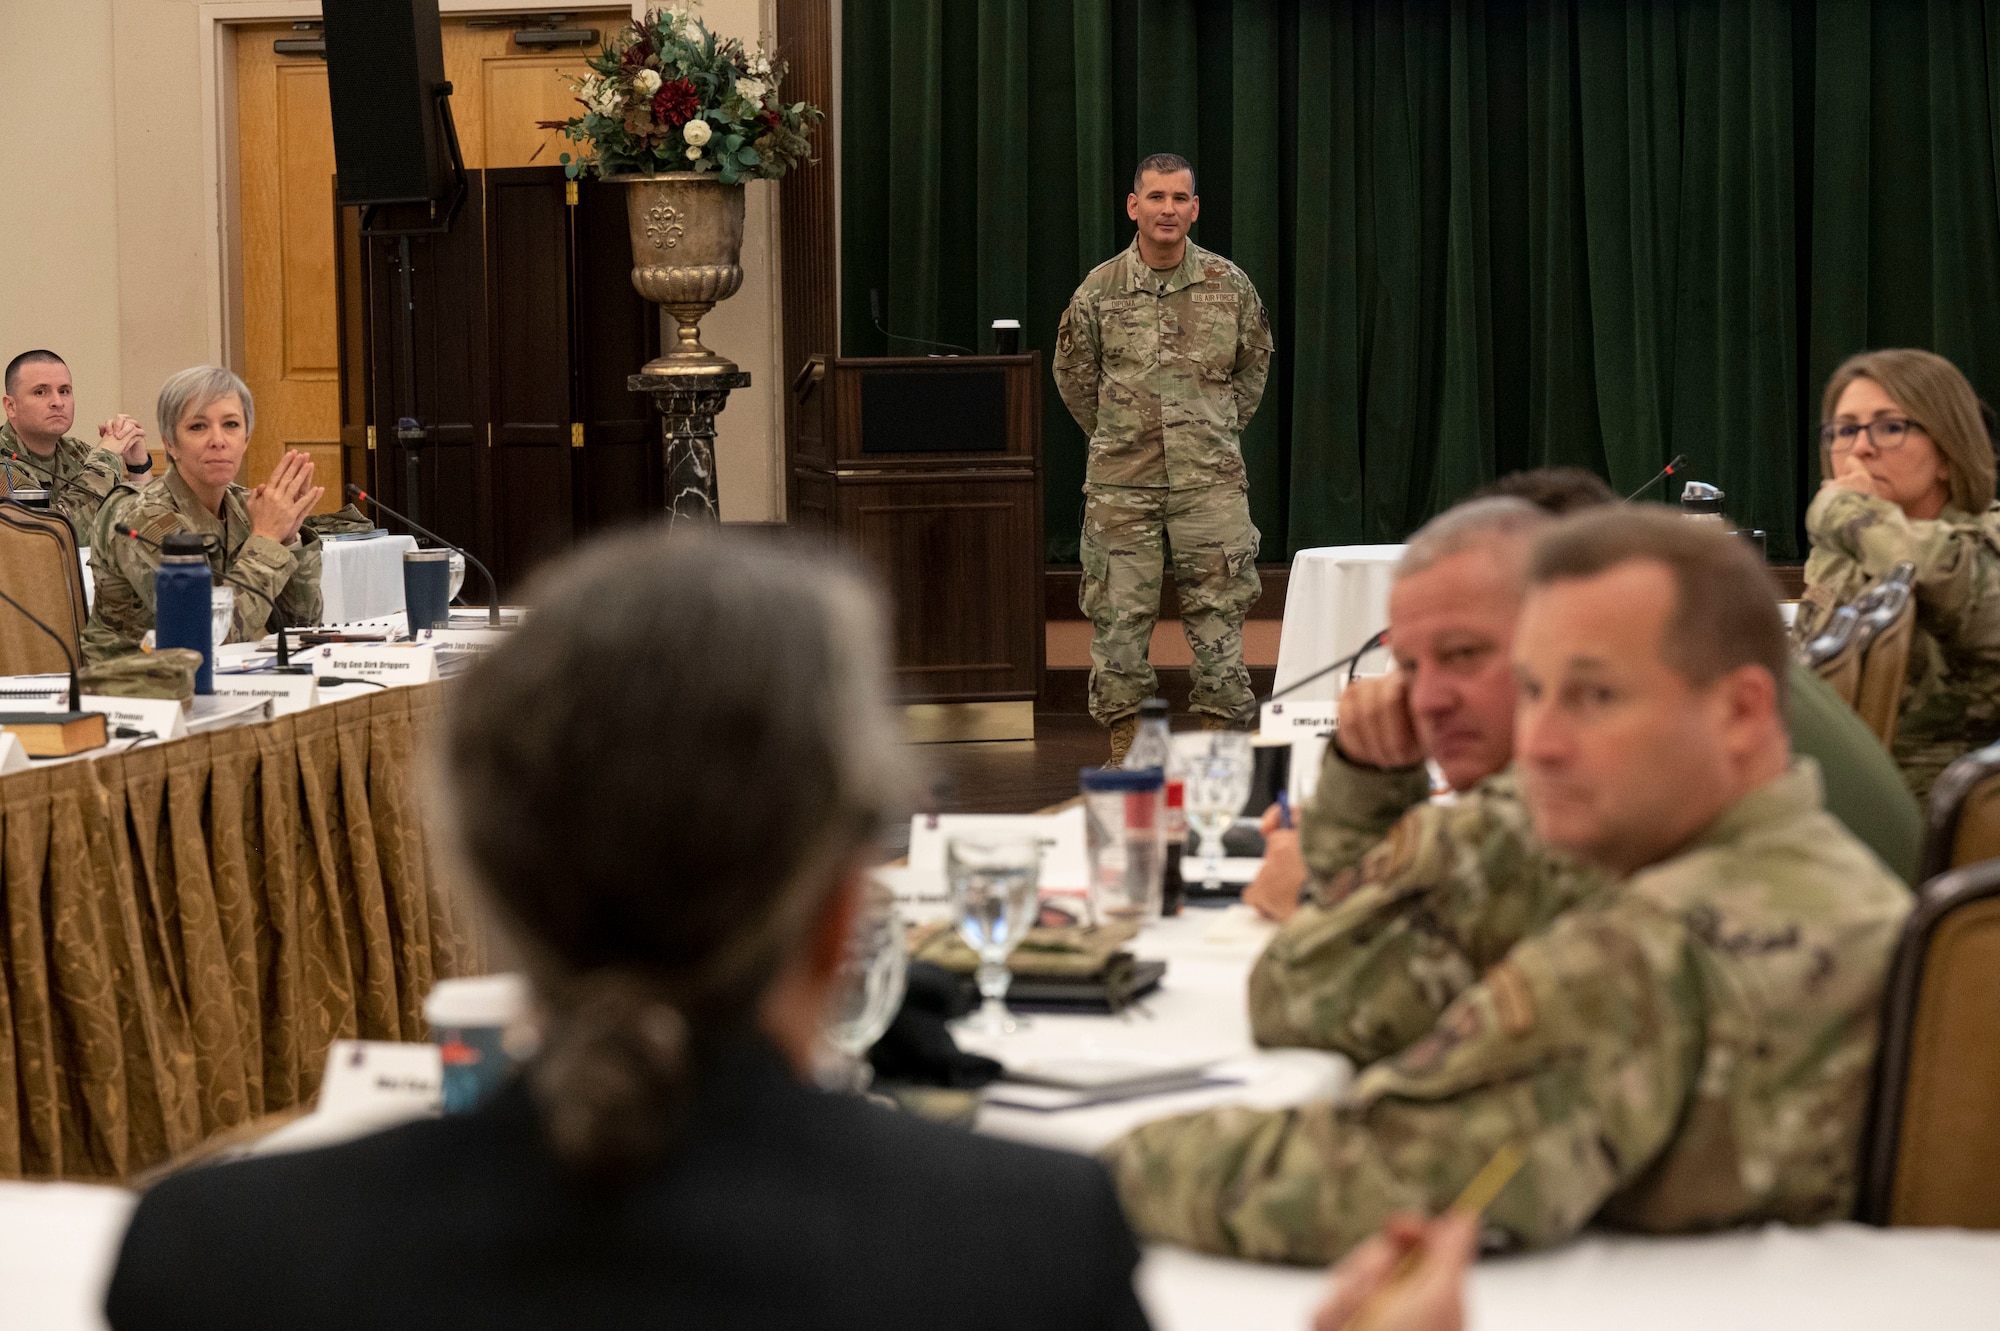 U.S. Air Force Col. Nicholas Dipoma, vice commander of 2nd Air Force, gives a briefing on transforming technical training during Air Education and Training Command's Gathering of the Torch at Joint Base San Antonio-Lackland, Texas, Nov. 9, 2022